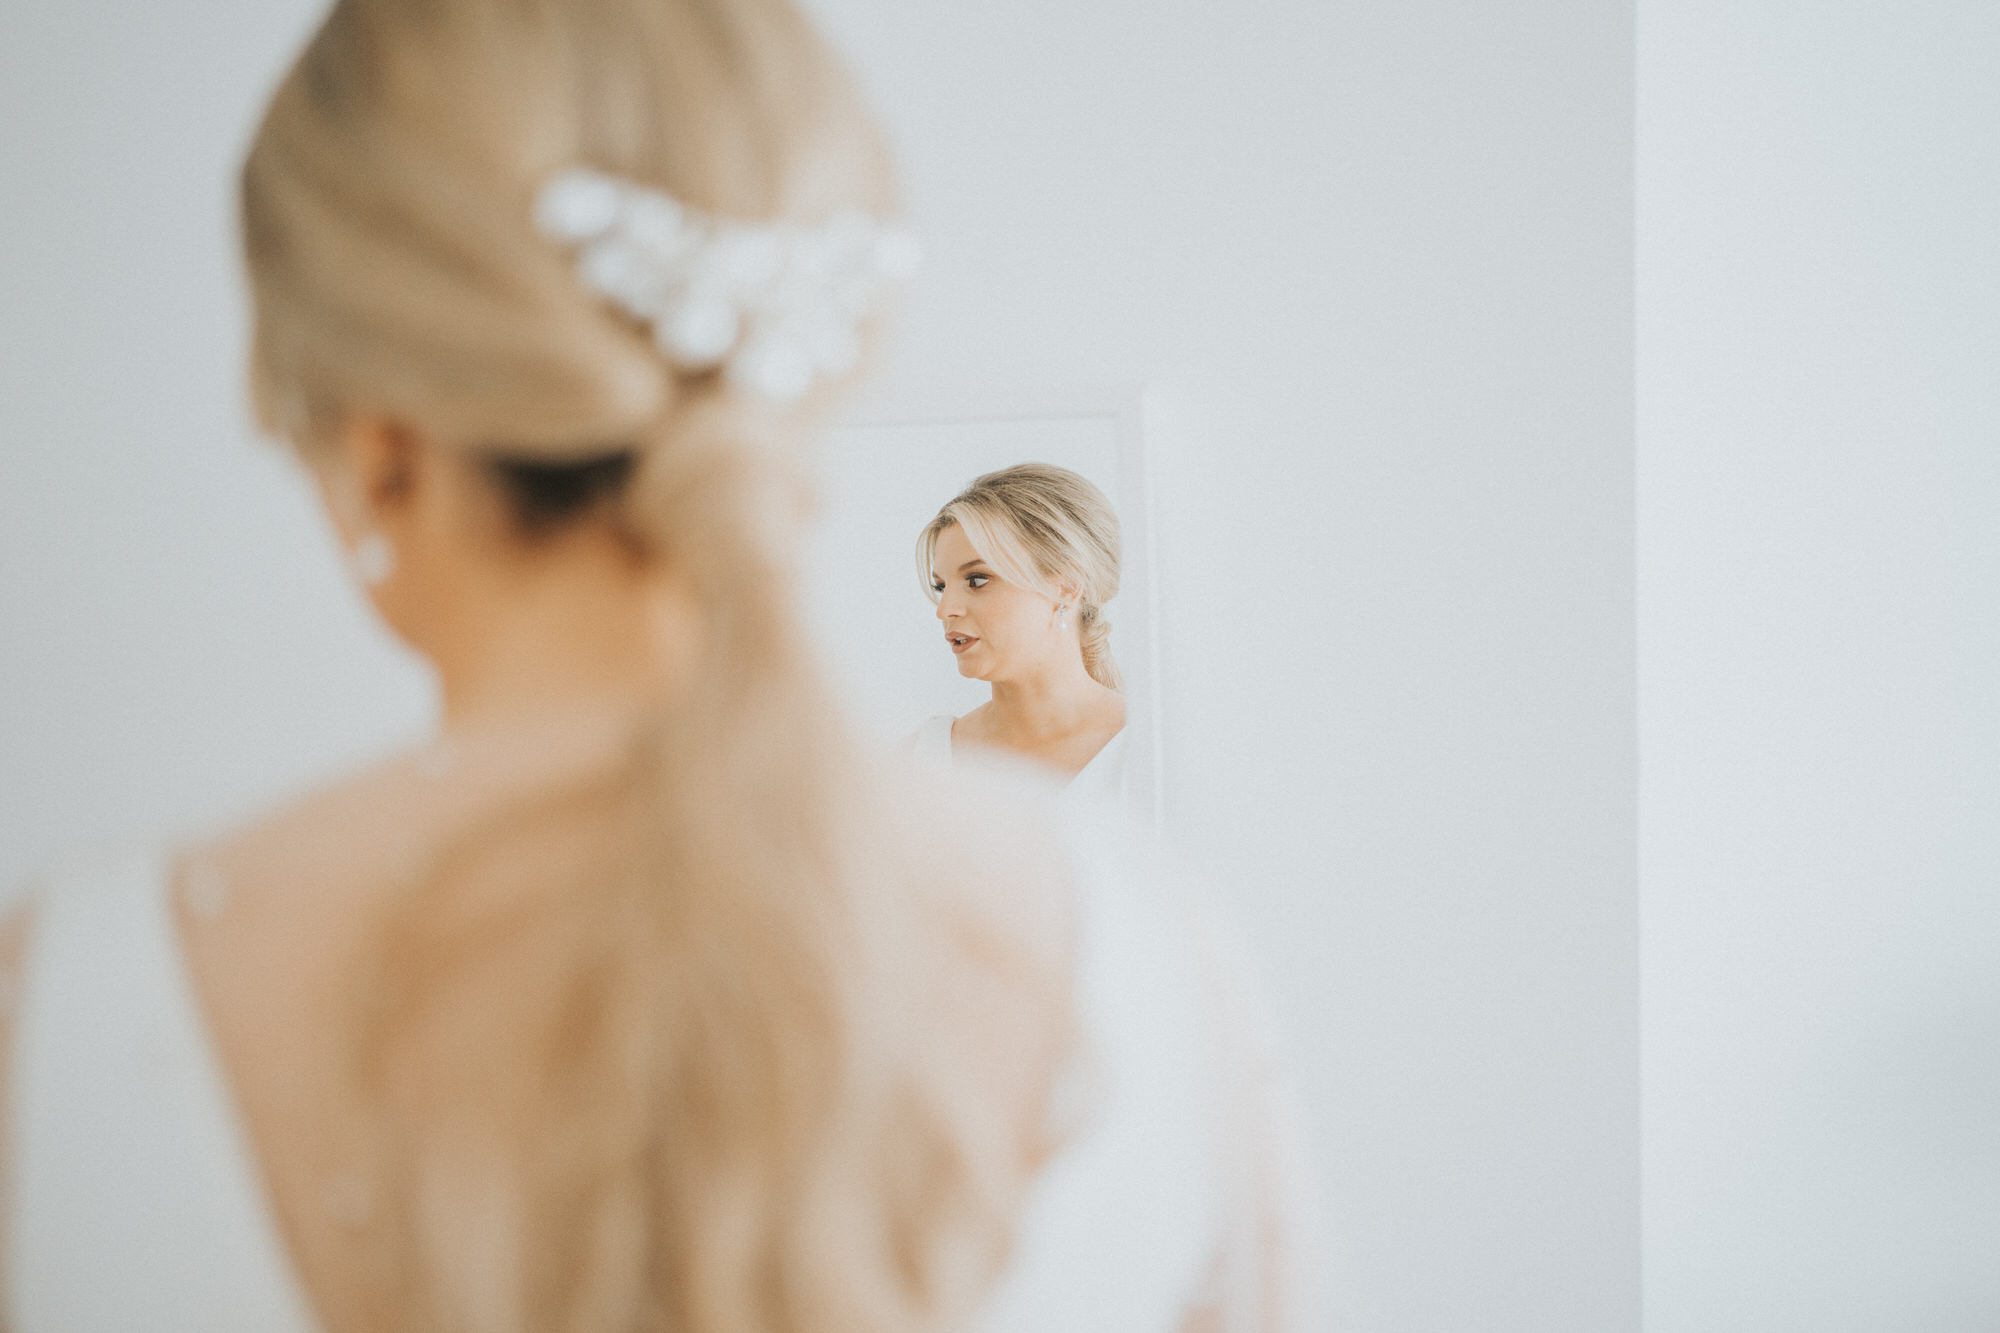 The bride is looking at herself in the mirror